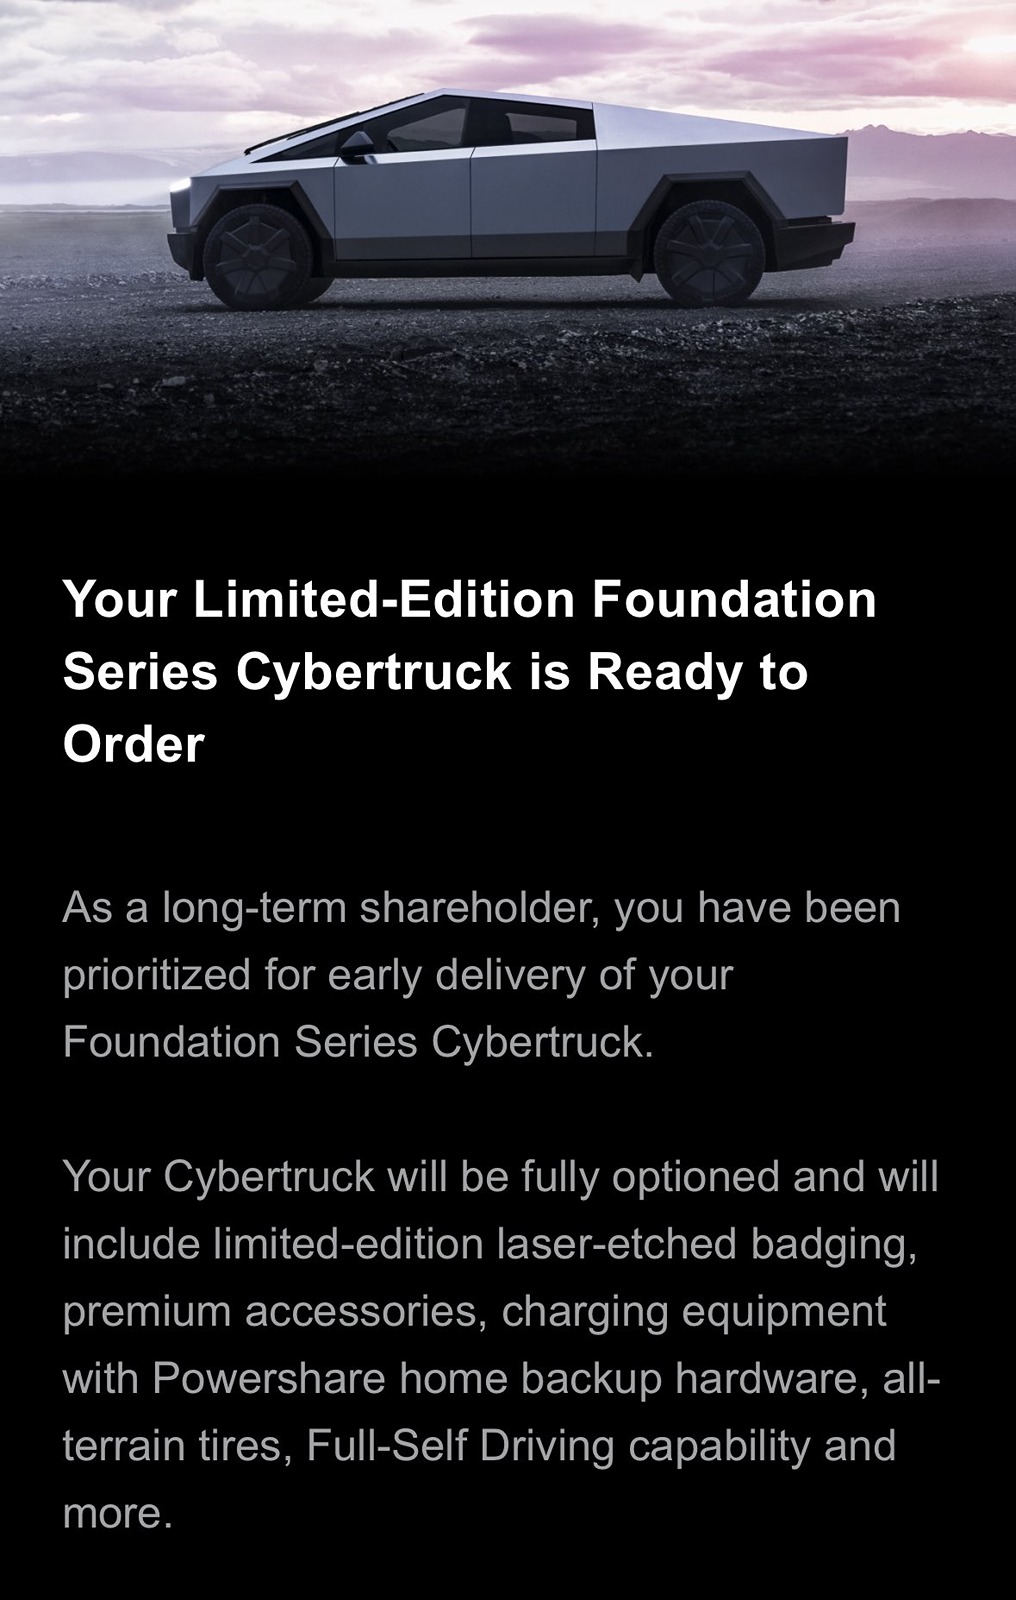 Tesla Cybertruck Early delivery of Foundation Series Cybertruck now available to long-term verified TSLA shareholder! cybertruck2